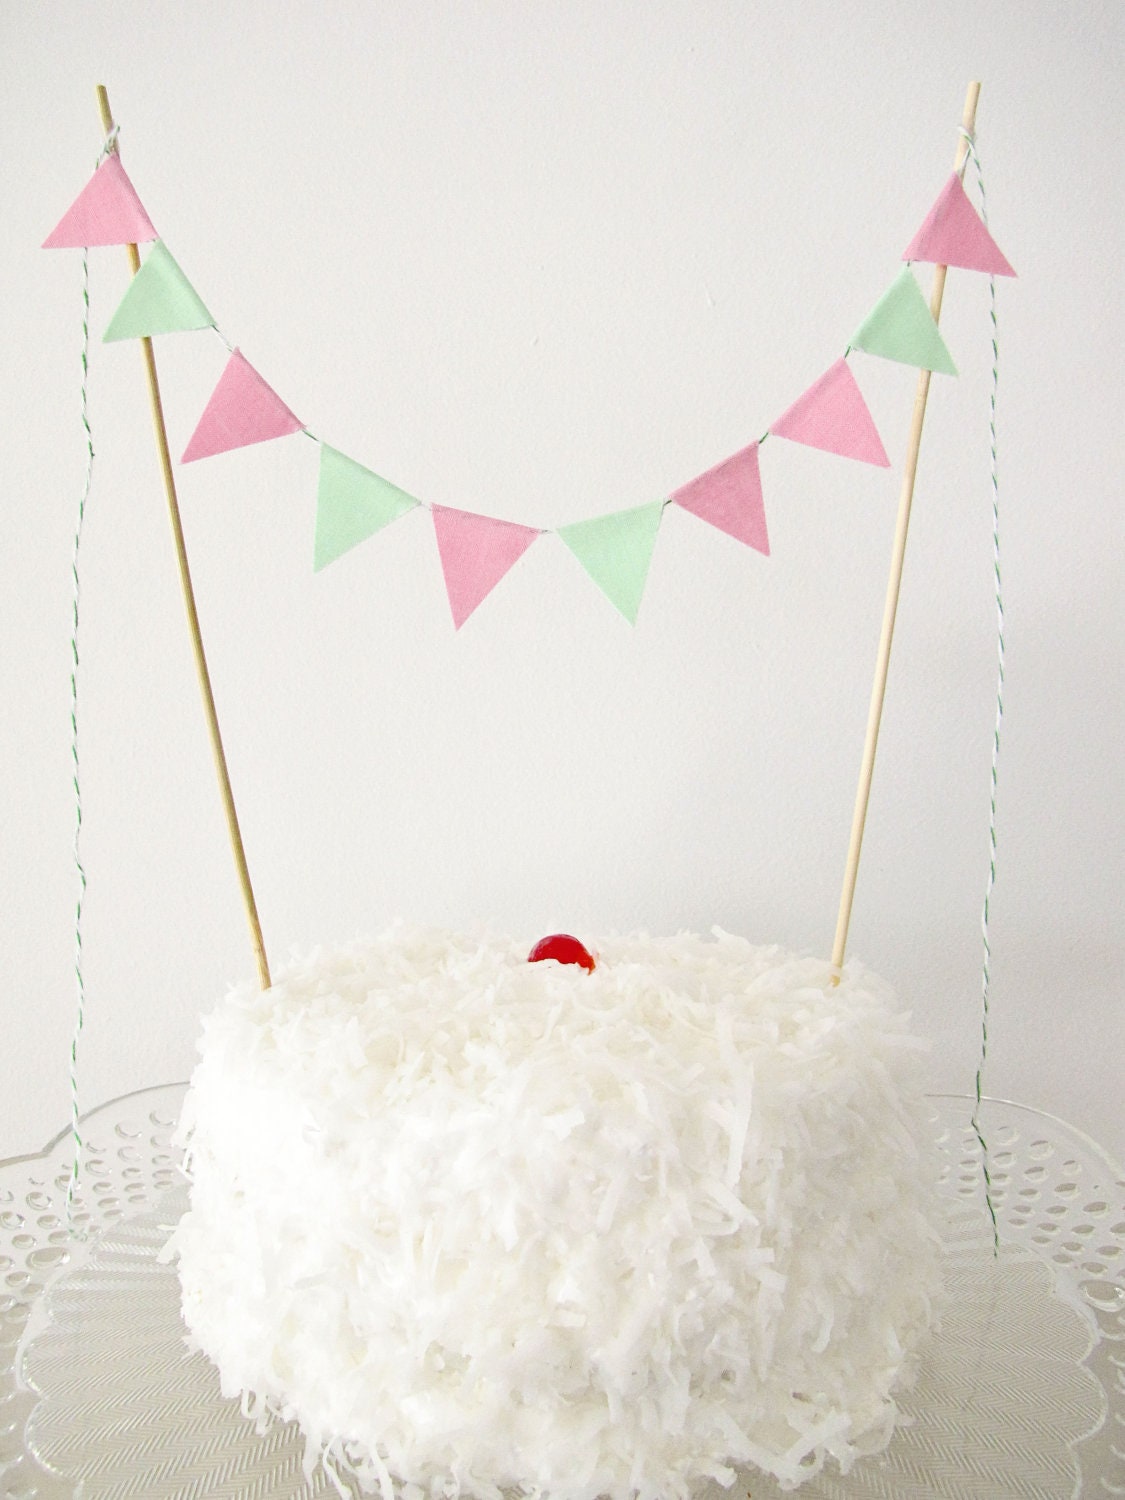 Fabric Cake Bunting Decoration - Cake Topper - Wedding, Birthday Party, Shower Decor in pink and mint